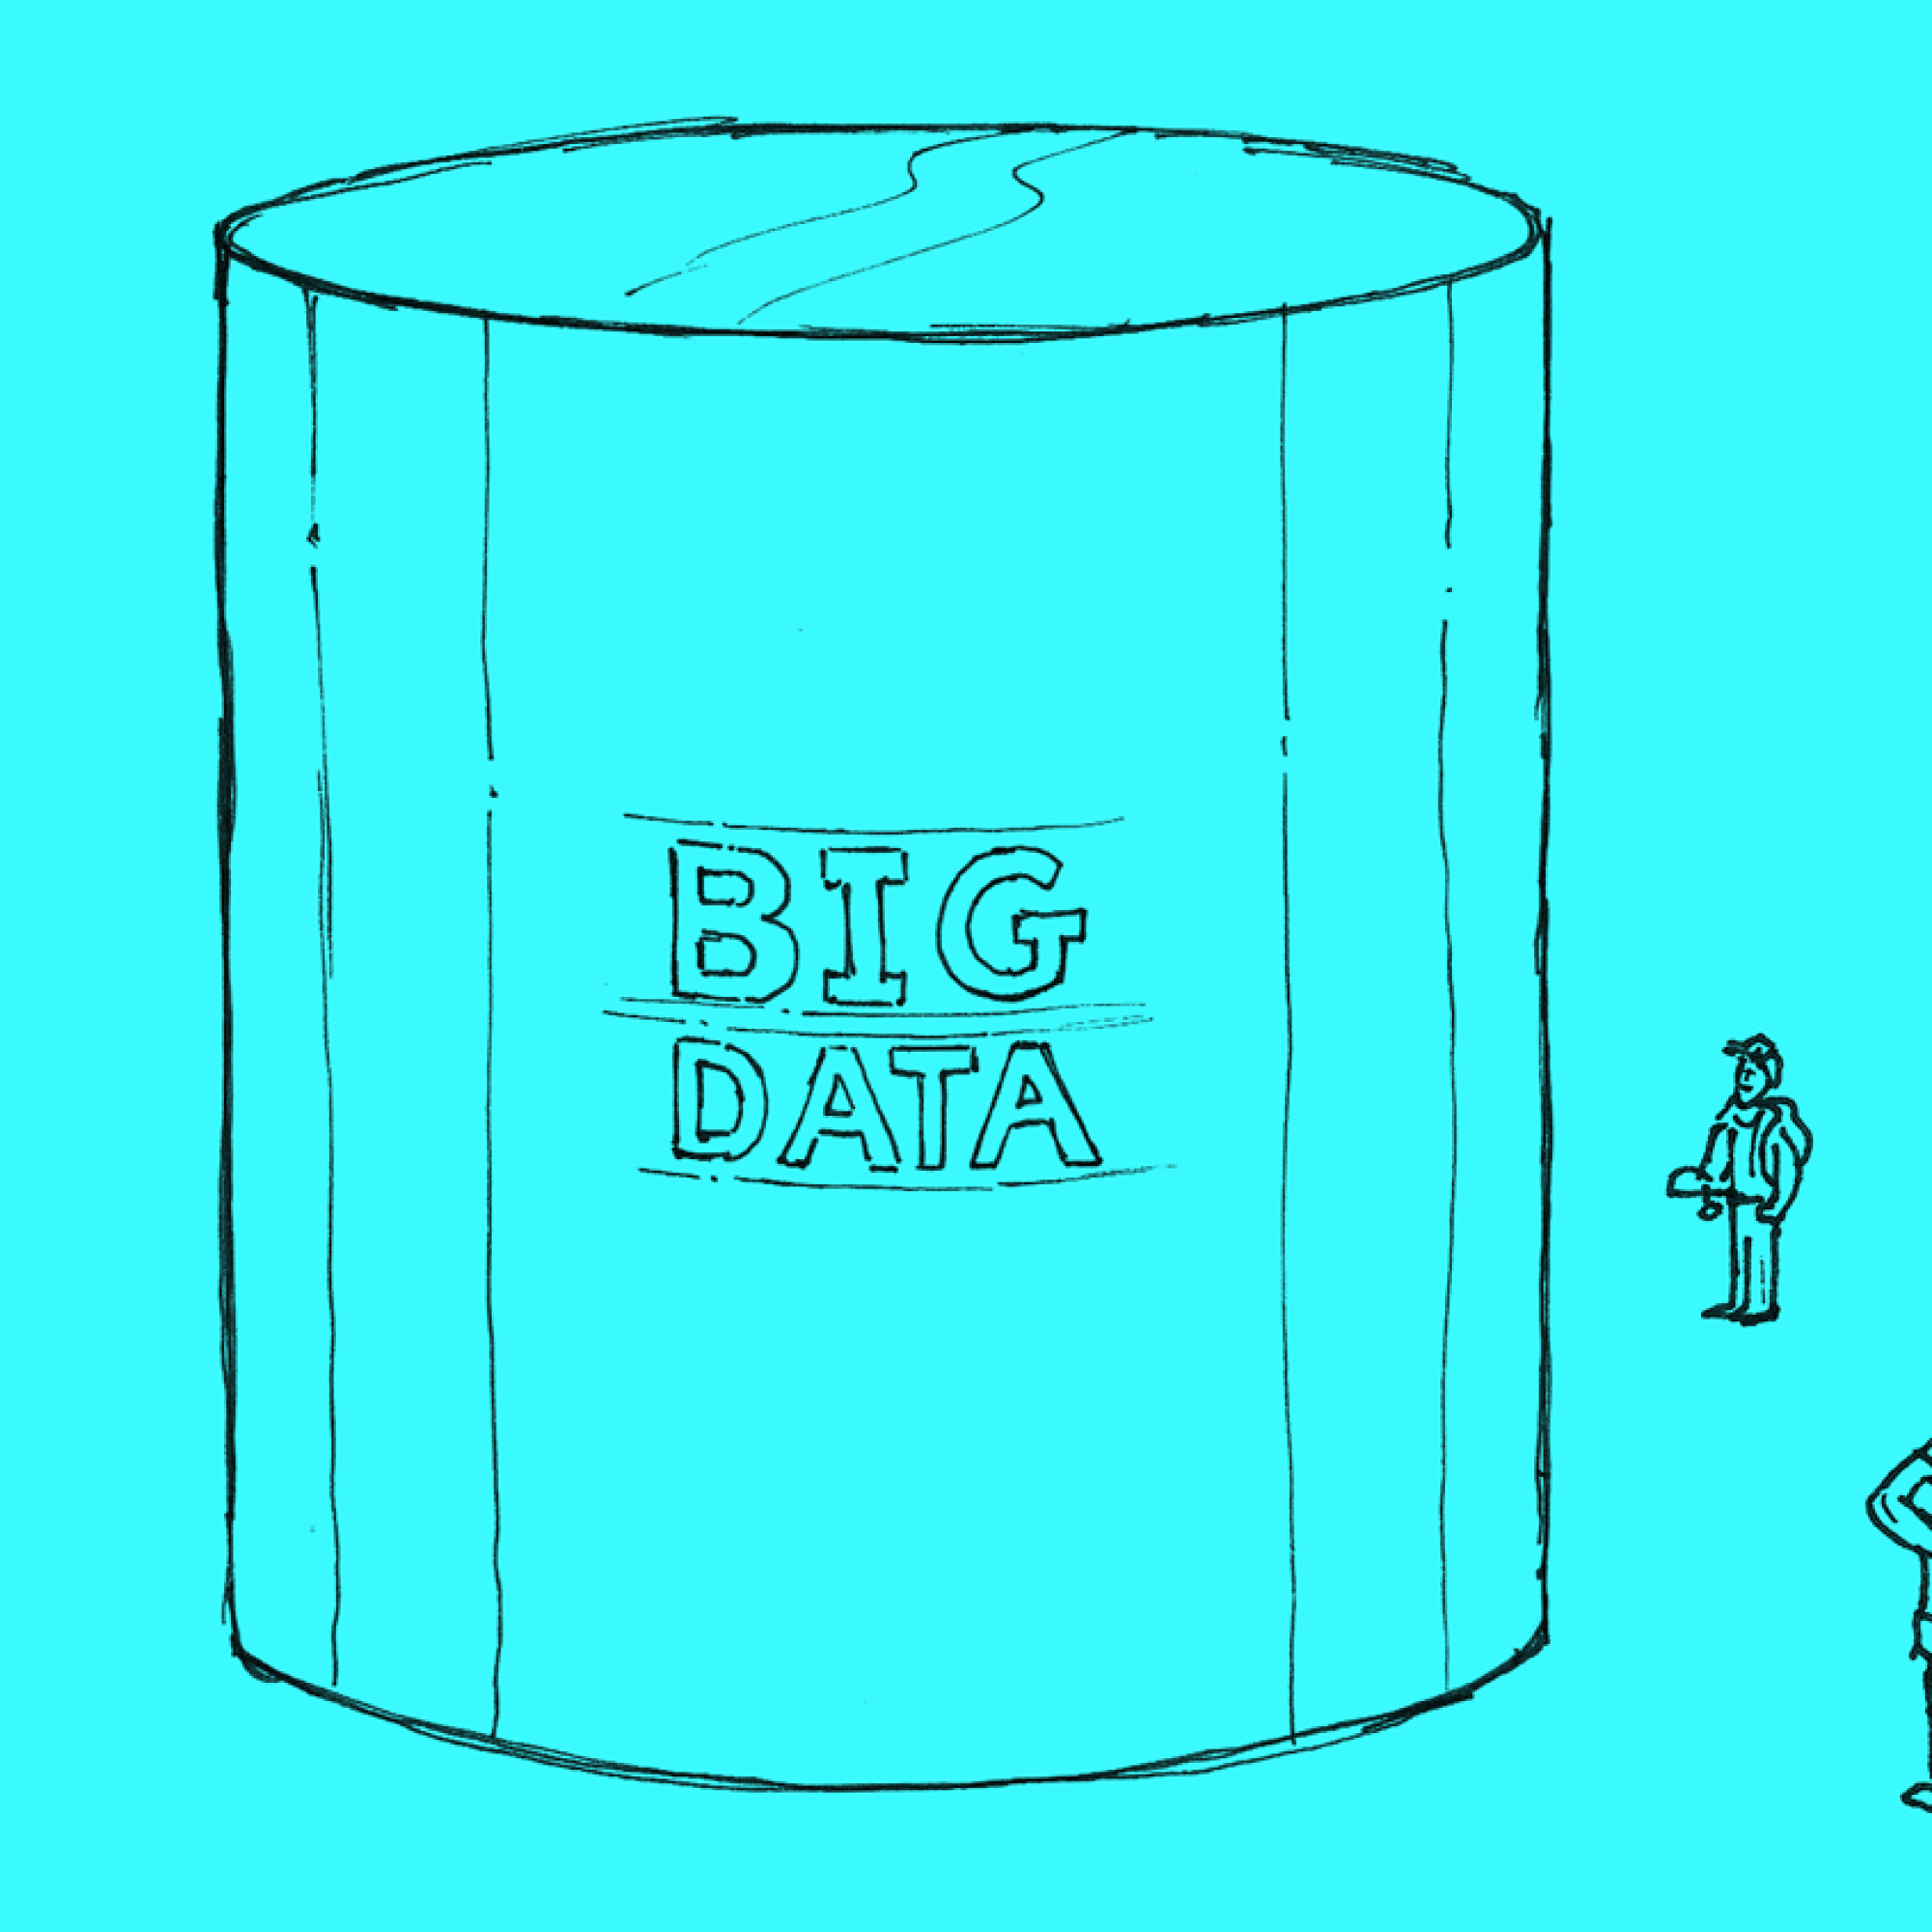 Guest Post: Big Data - Does Size Matter? by Timandra Harkness